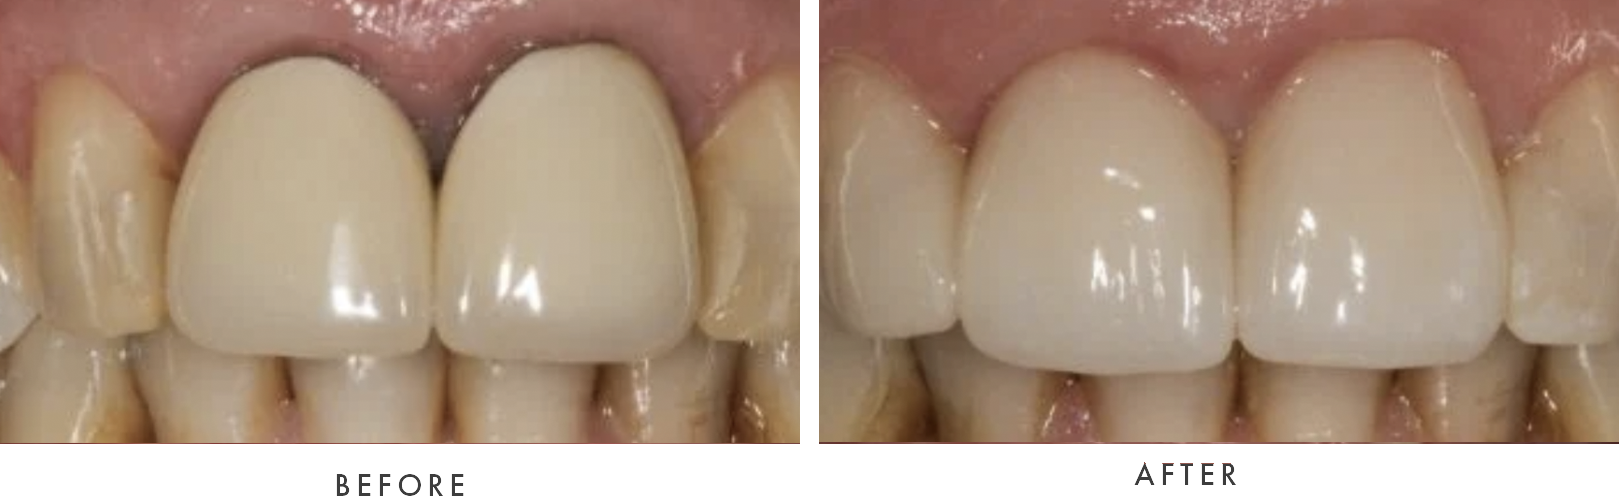 dental crown combined case 6 drscruggs